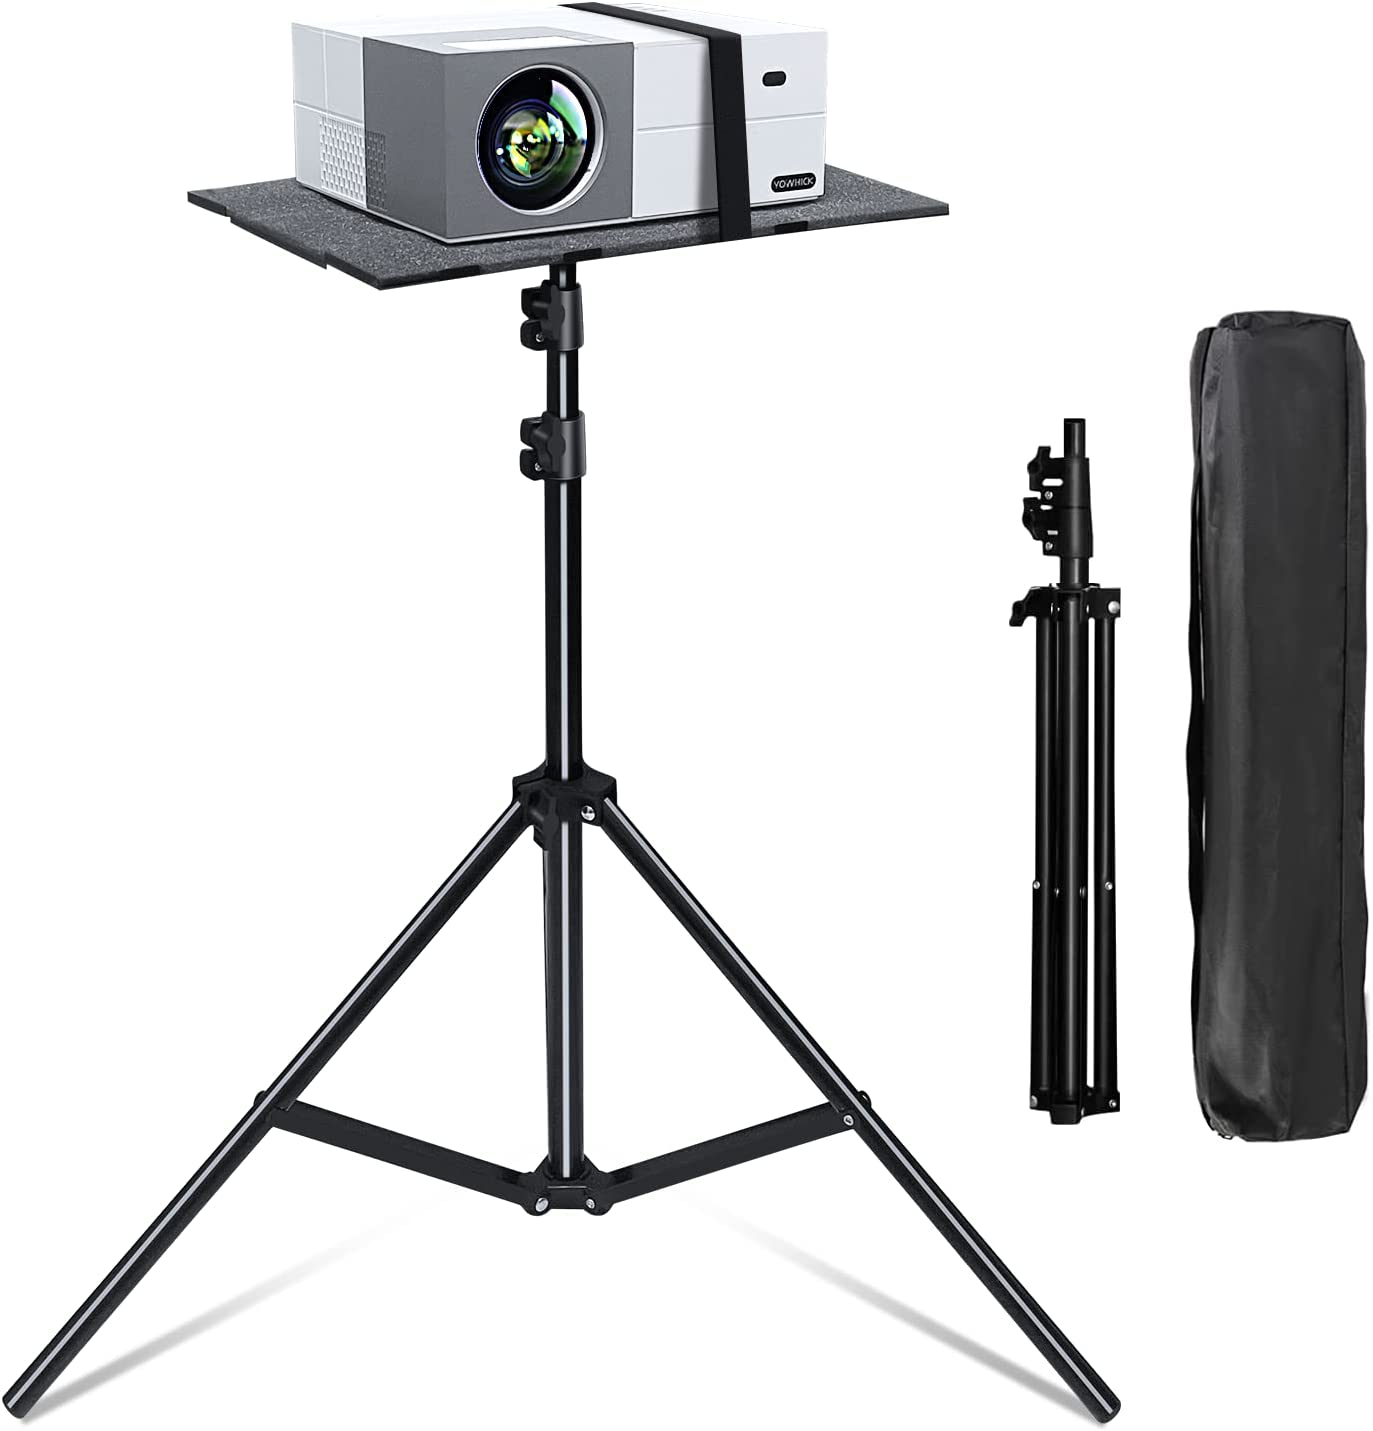 YOWHICK DP01 WiFi Bluetooth Projector and Projector Tripod Stand Bundle - YOWHICK